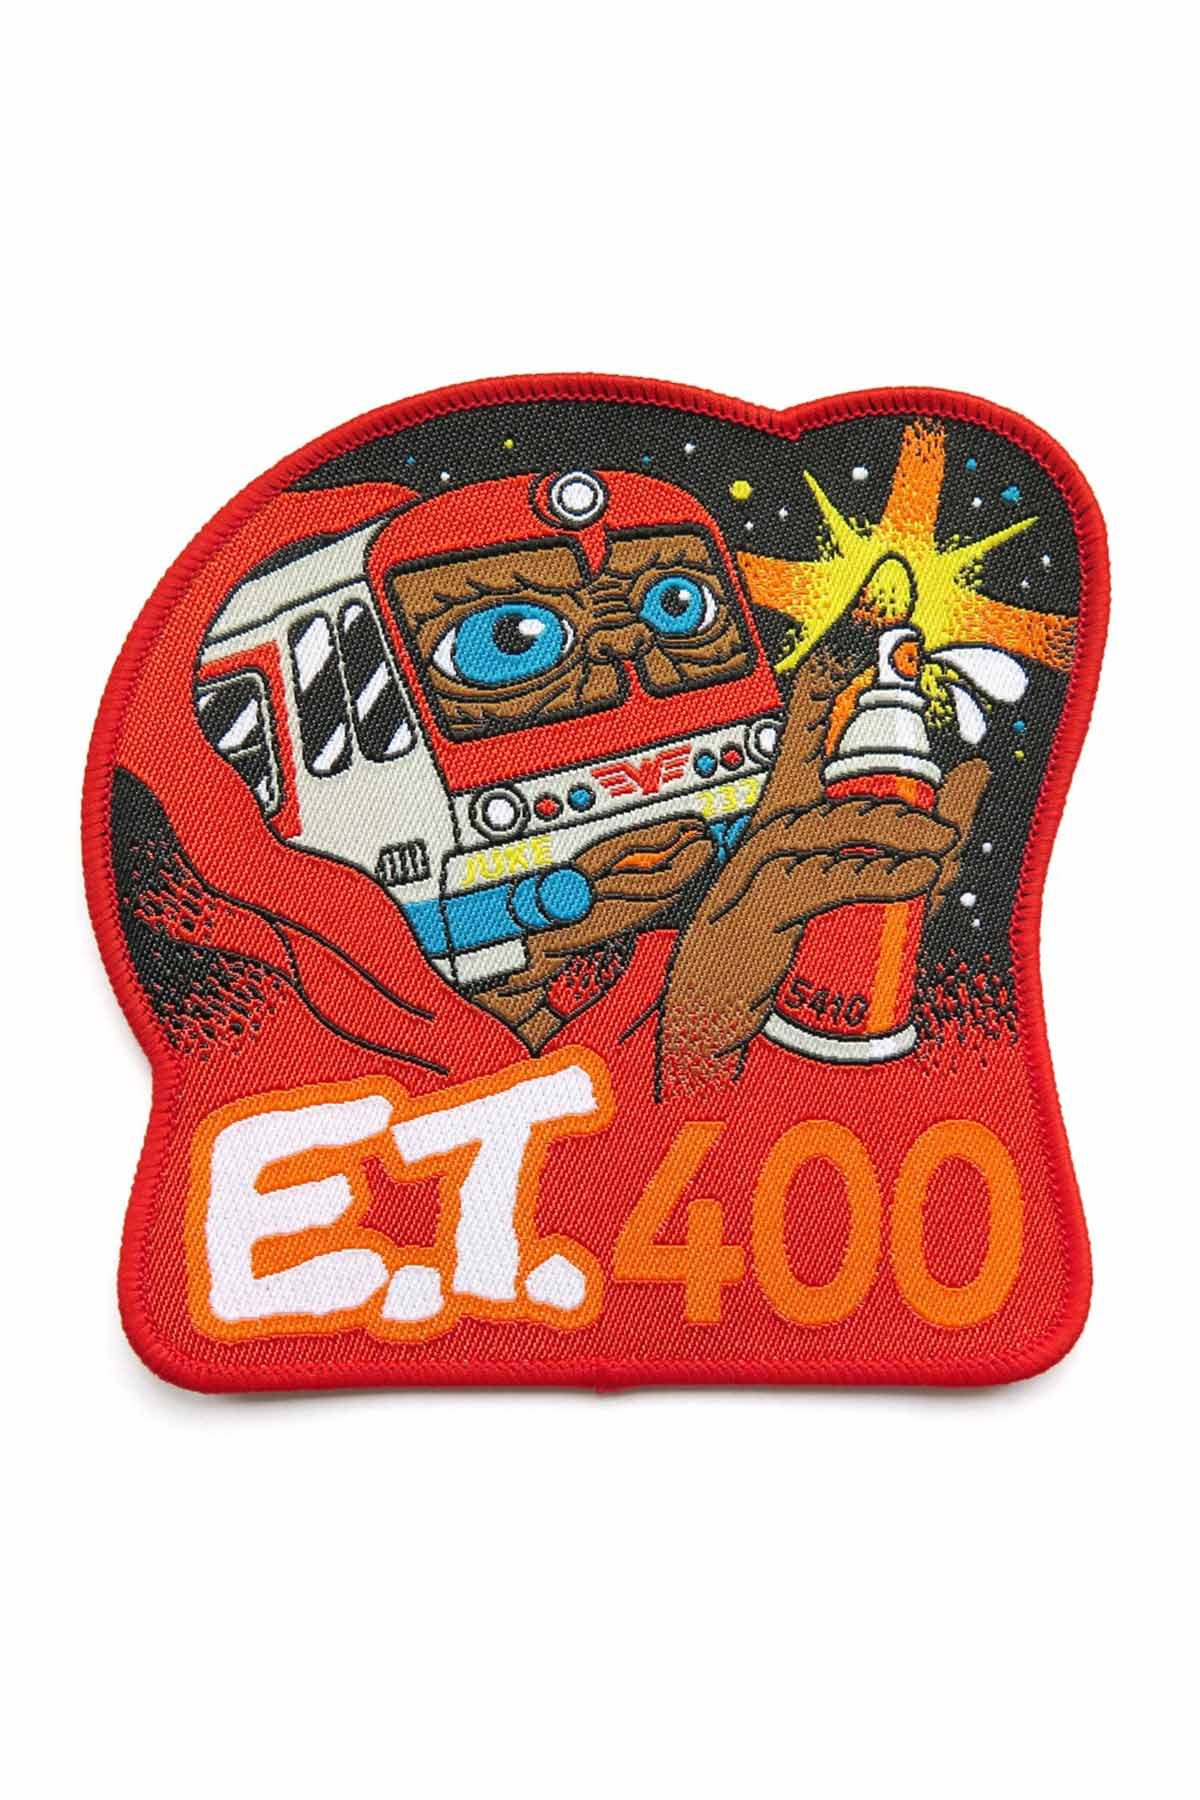 Flying Fortress E.T.400 Patch